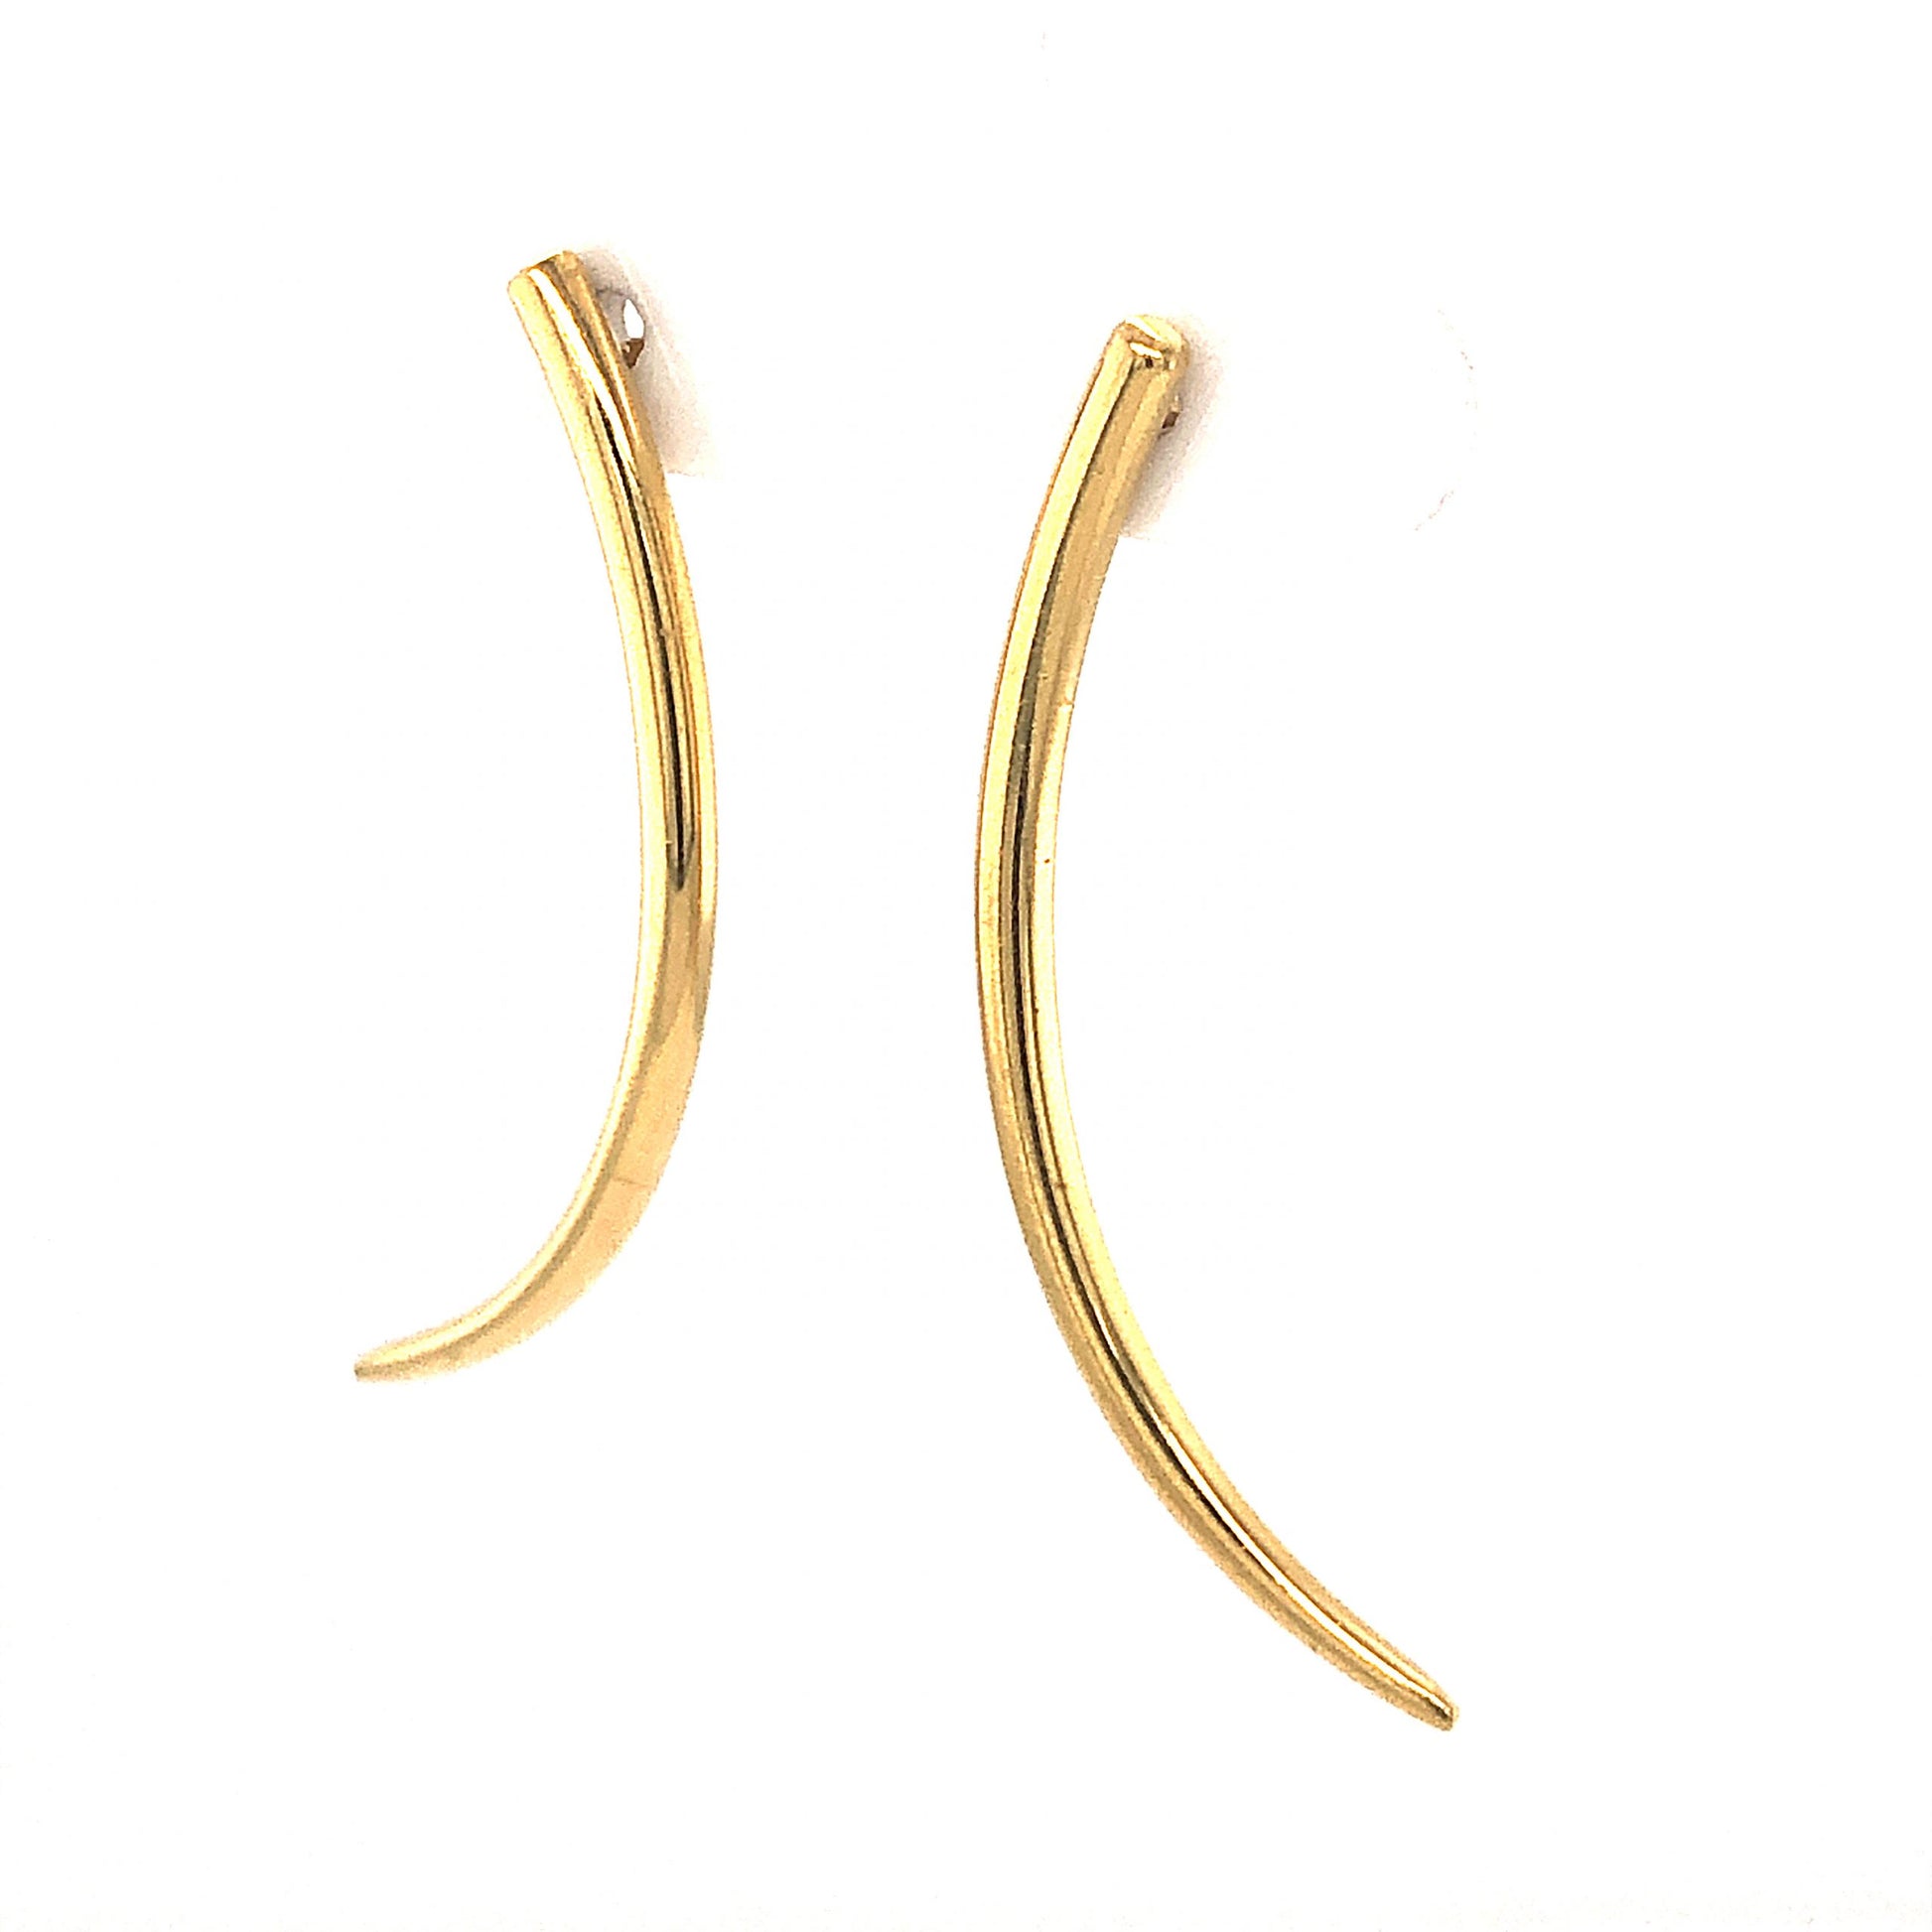 Curved Bar Earrings in 18k Yellow Gold